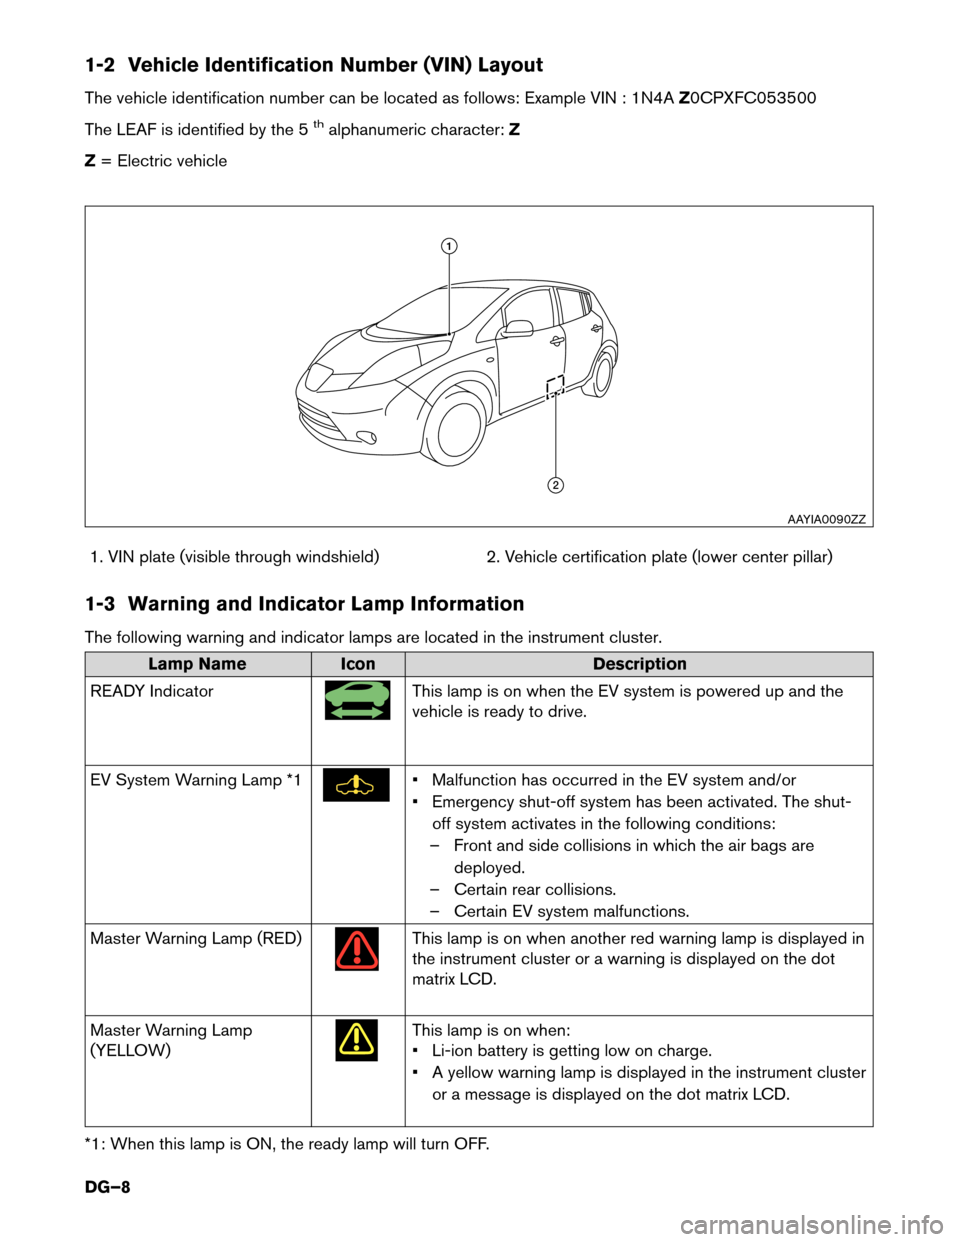 NISSAN LEAF 2015 1.G Dismantling Guide 1-2 Vehicle Identification Number (VIN) Layout
The
vehicle identification number can be located as follows: Example VIN : 1N4A Z0CPXFC053500
The LEAF is identified by the 5
thalphanumeric character: Z